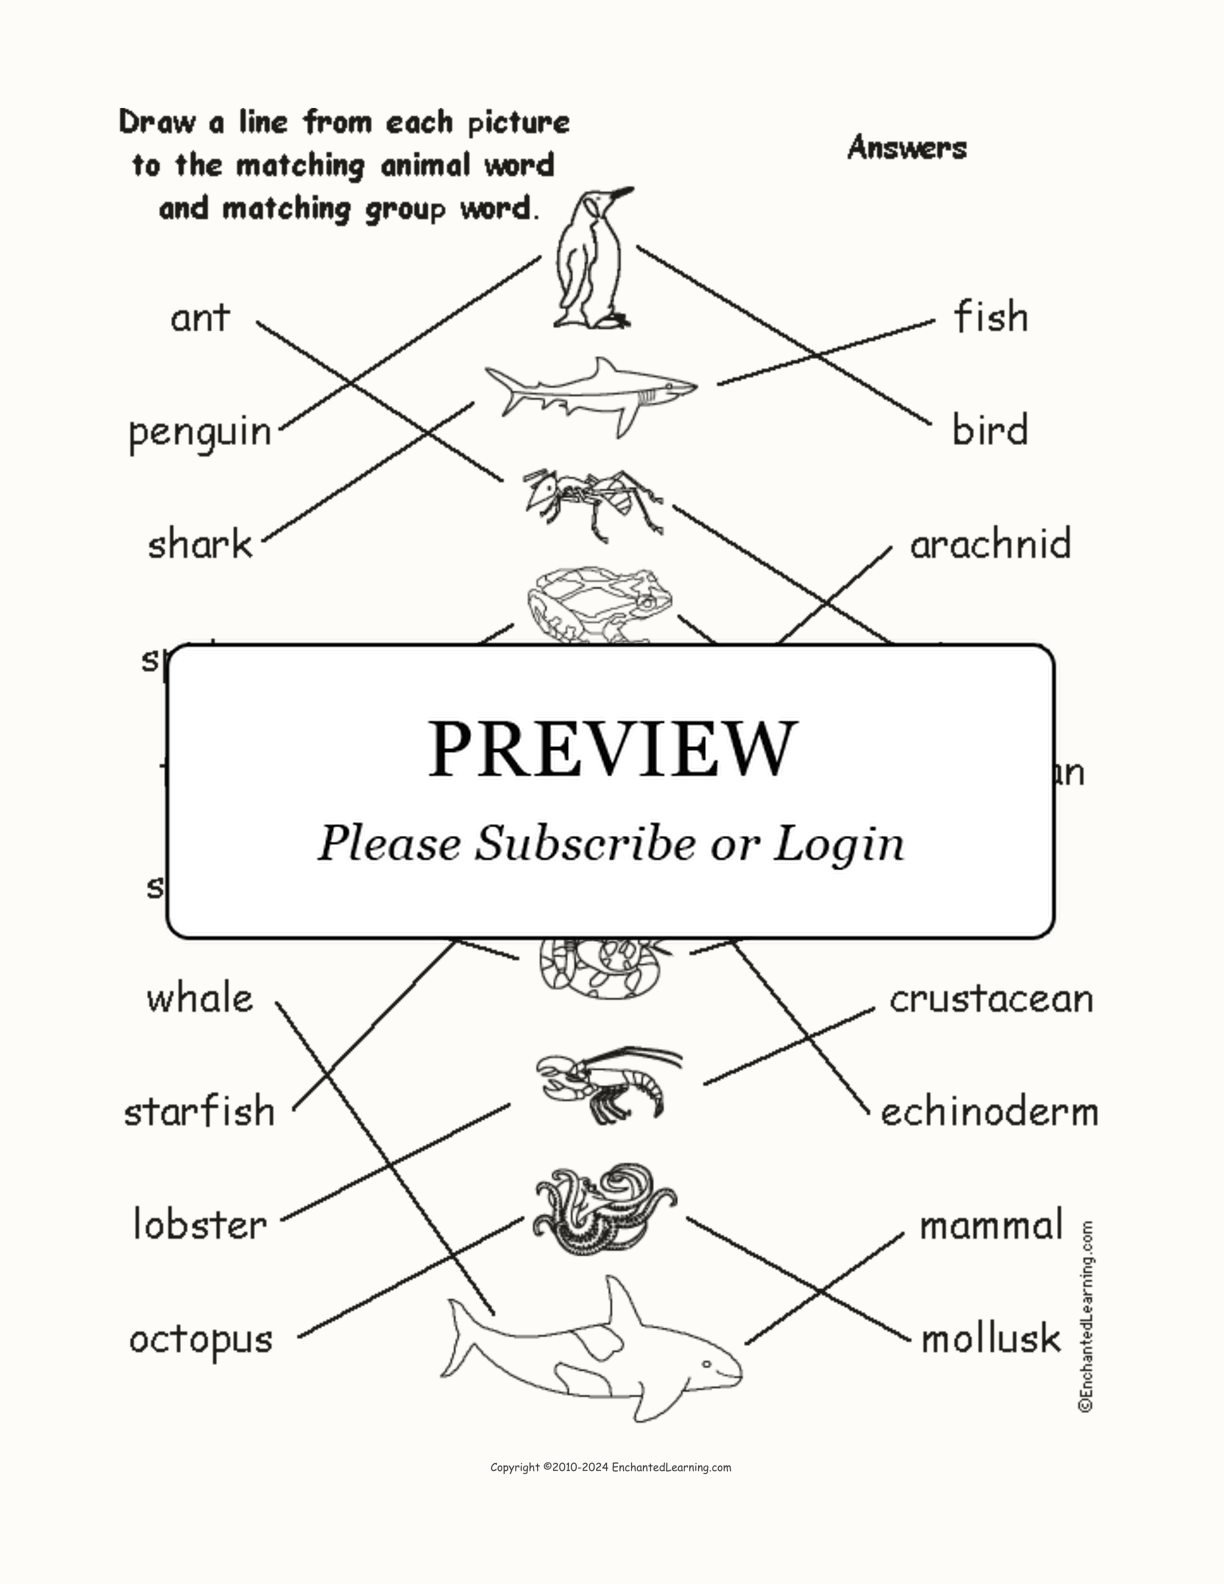 Animal Groups #1 - Match the Words to the Pictures interactive worksheet page 2